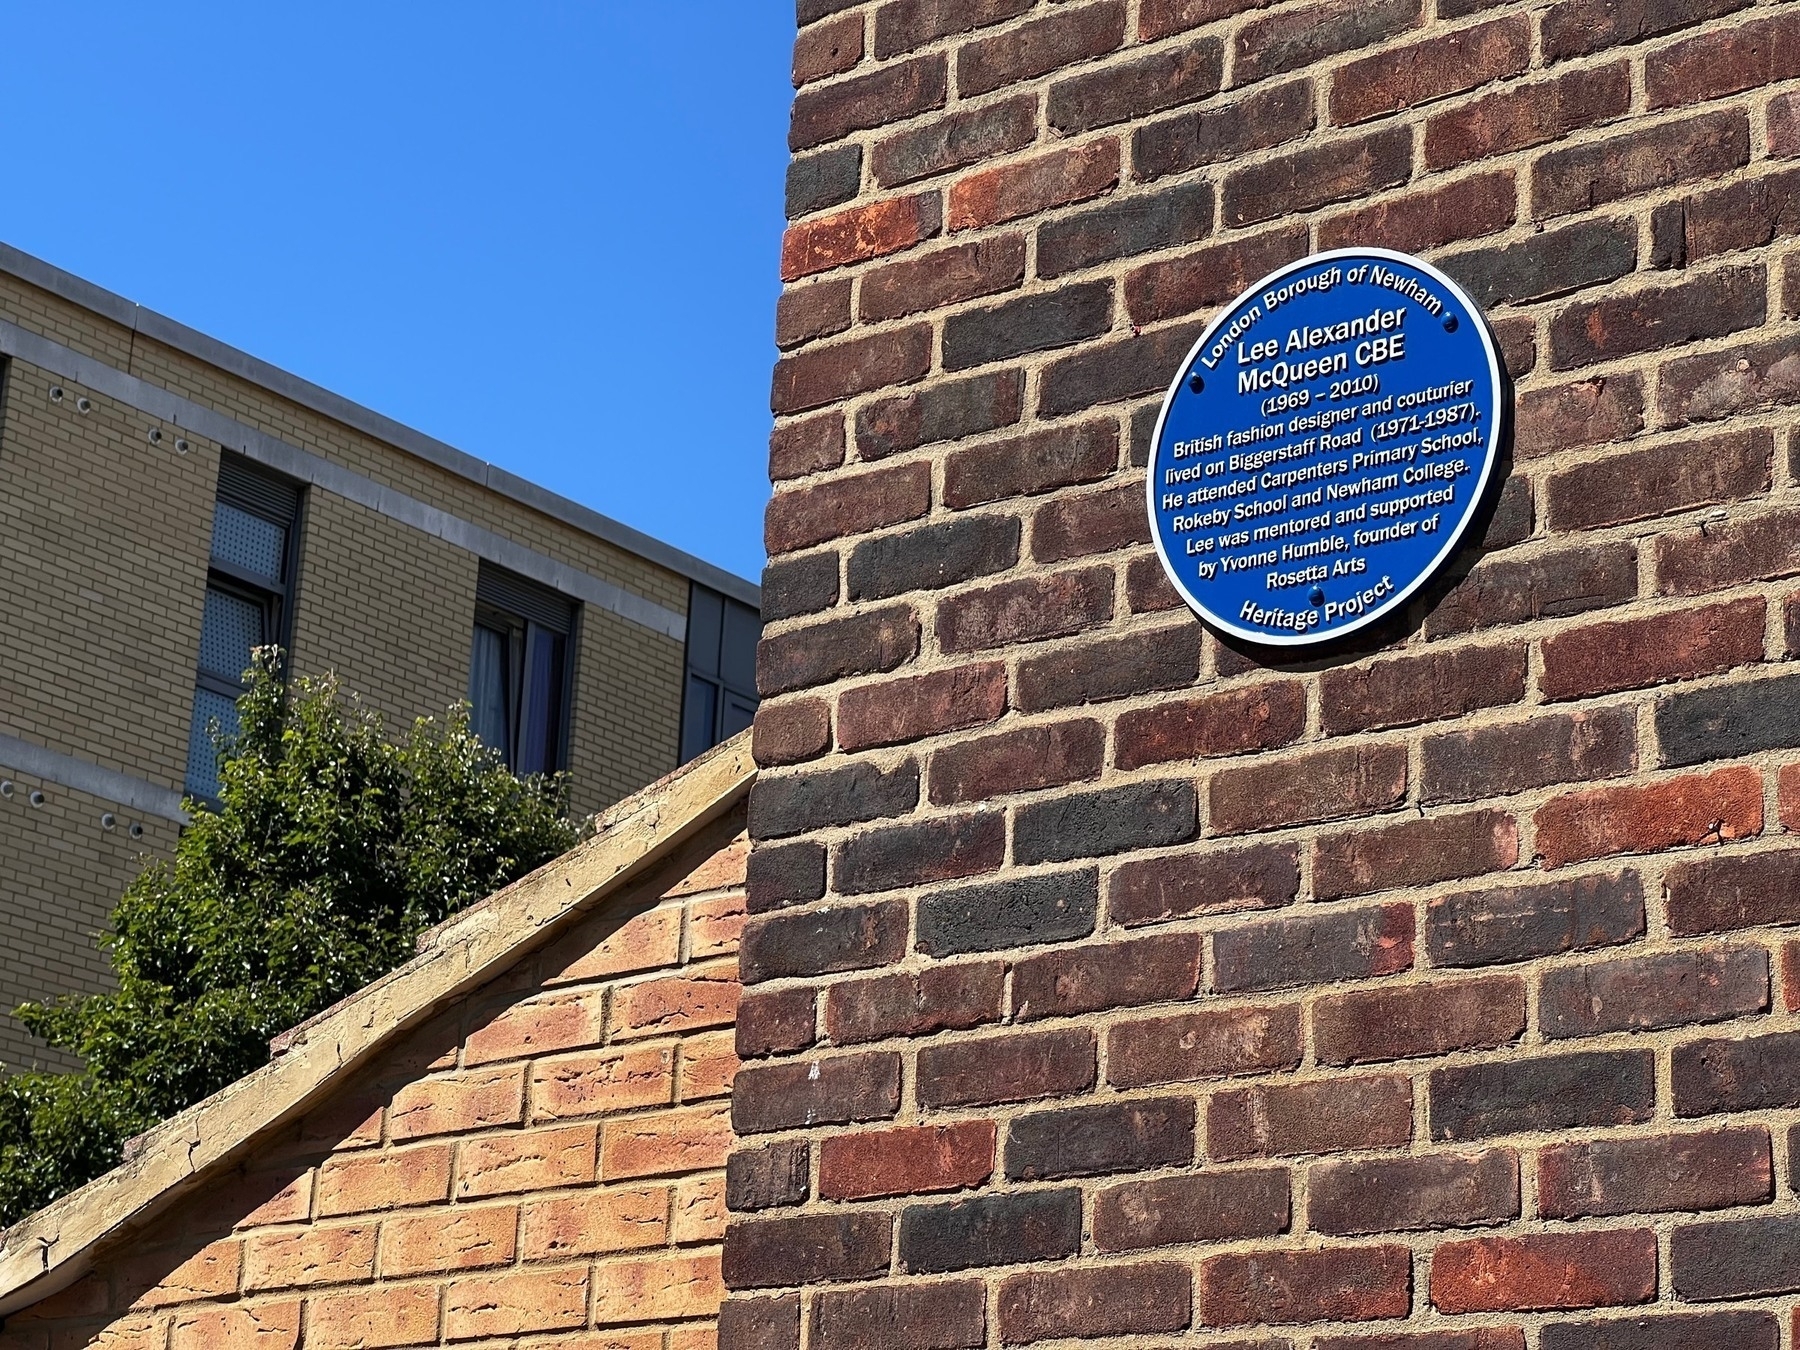 The text of the plaque: Lee Alexander&10;McQueen CBE&10;(1969 - 2010)&10;British fashion designer and couturier lived an Biggerstaff Road (1971-1987), He attended Carpenters Primary School, Rokeby School and Newham College, Lee was mentored and supported by Yvonne Humble, founder of&10;Rosetta Arts